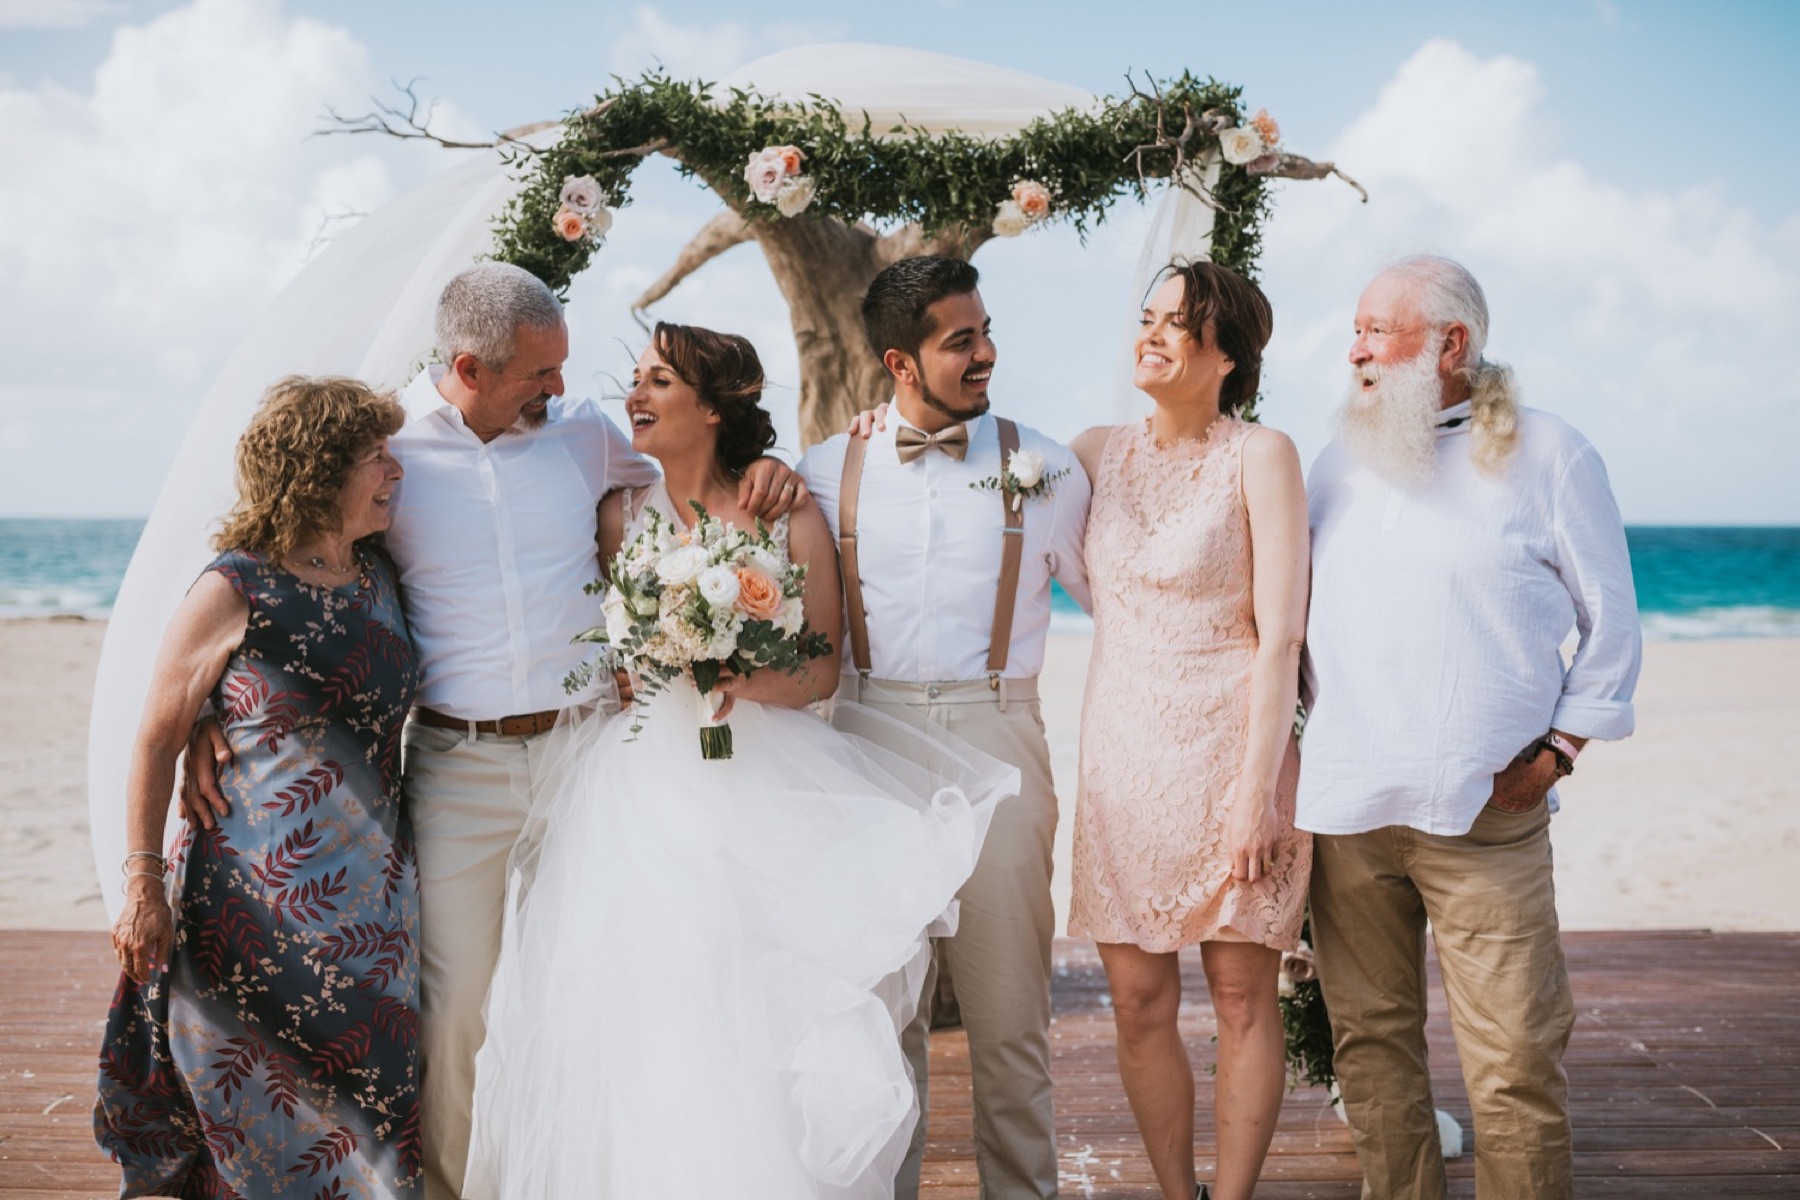 Fun family photo of bride and groom with brides family